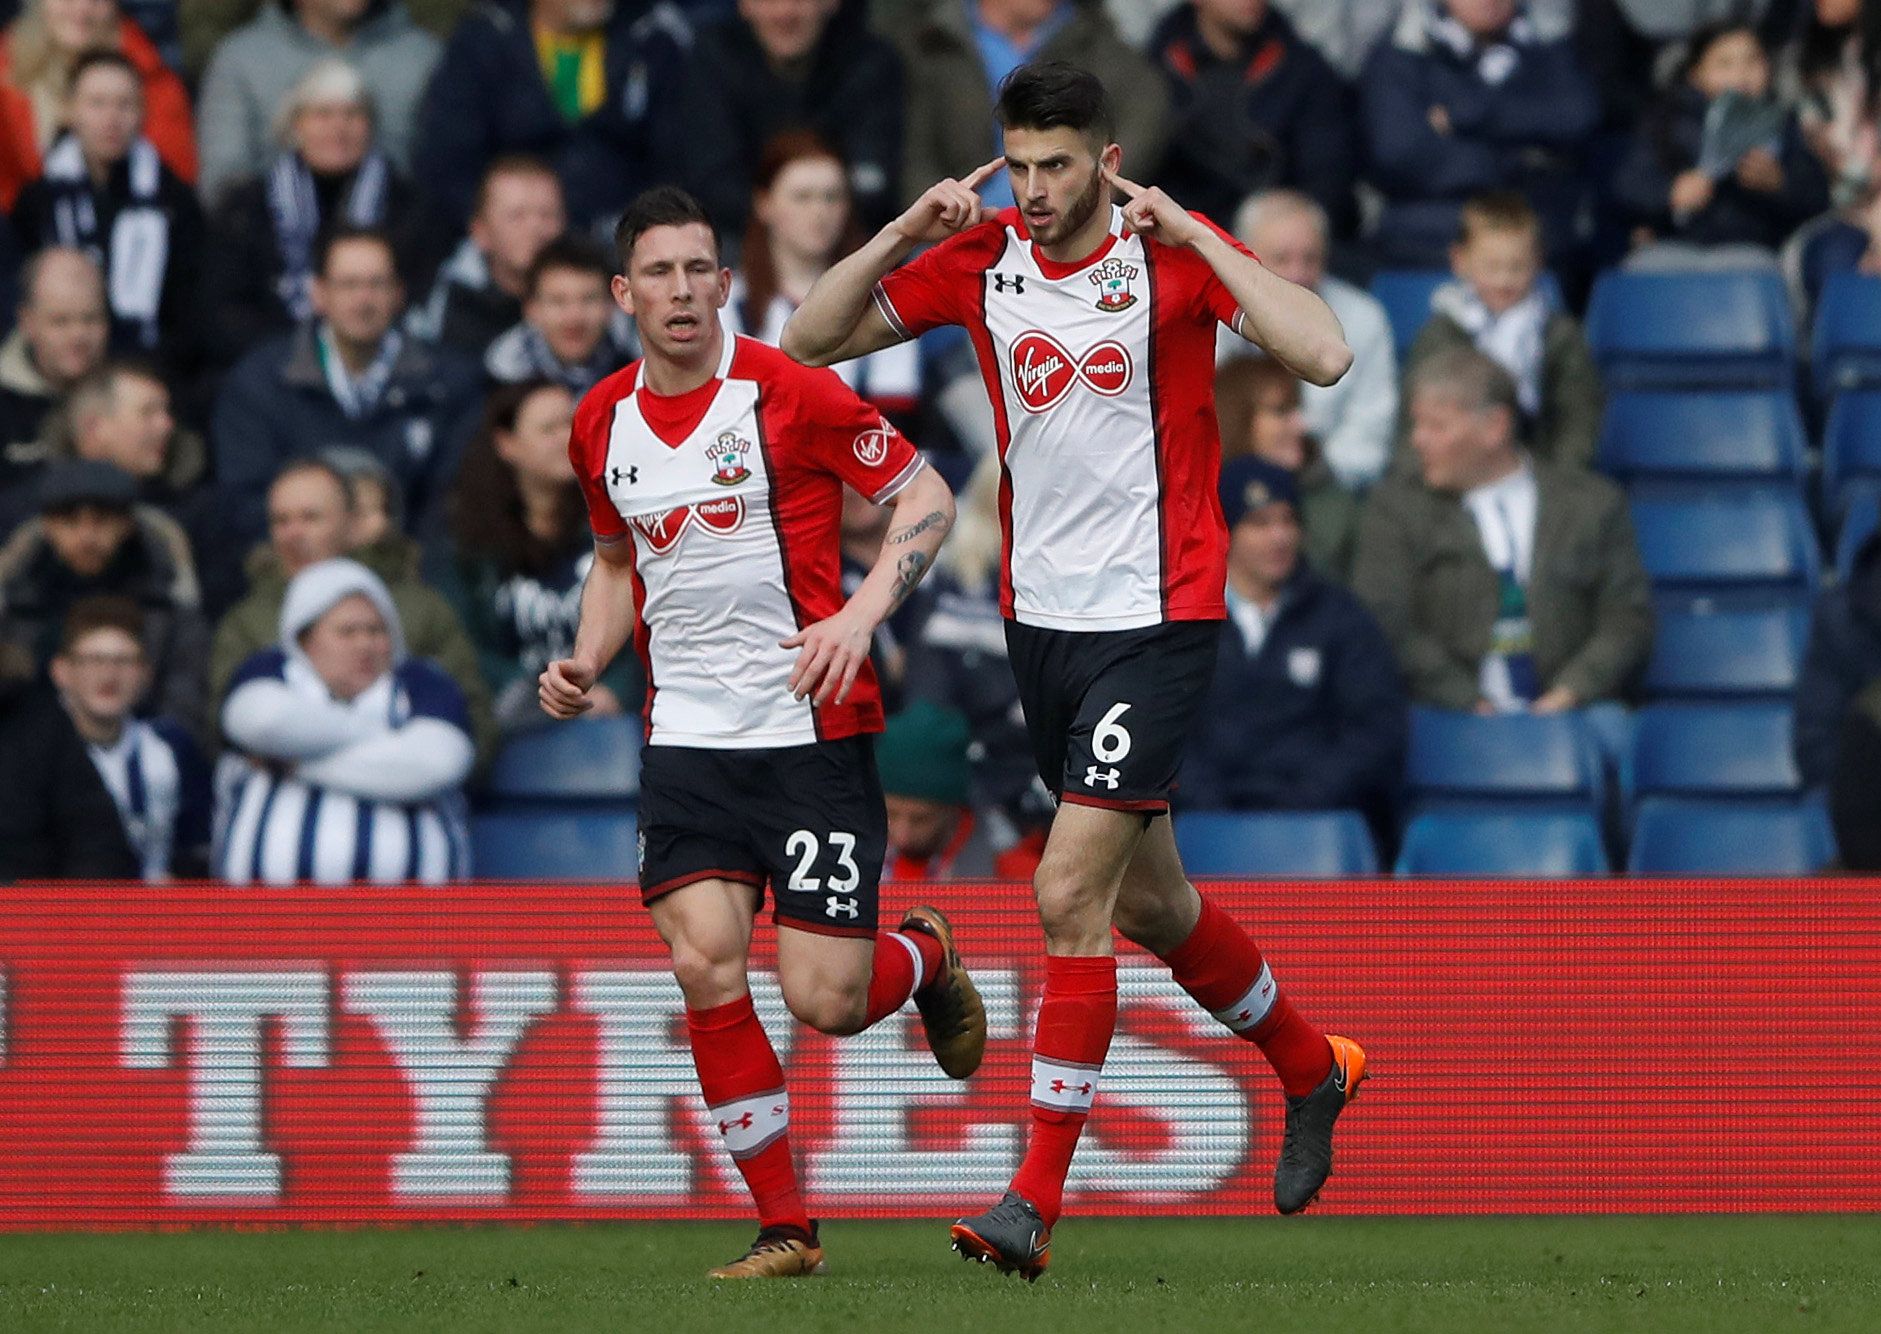 Soccer Football - FA Cup Fifth Round - West Bromwich Albion vs Southampton - The Hawthorns, West Bromwich, Britain - February 17, 2018   Southampton's Wesley Hoedt celebrates scoring their first goal with Pierre-Emile Hojbjerg    Action Images via Reuters/Carl Recine